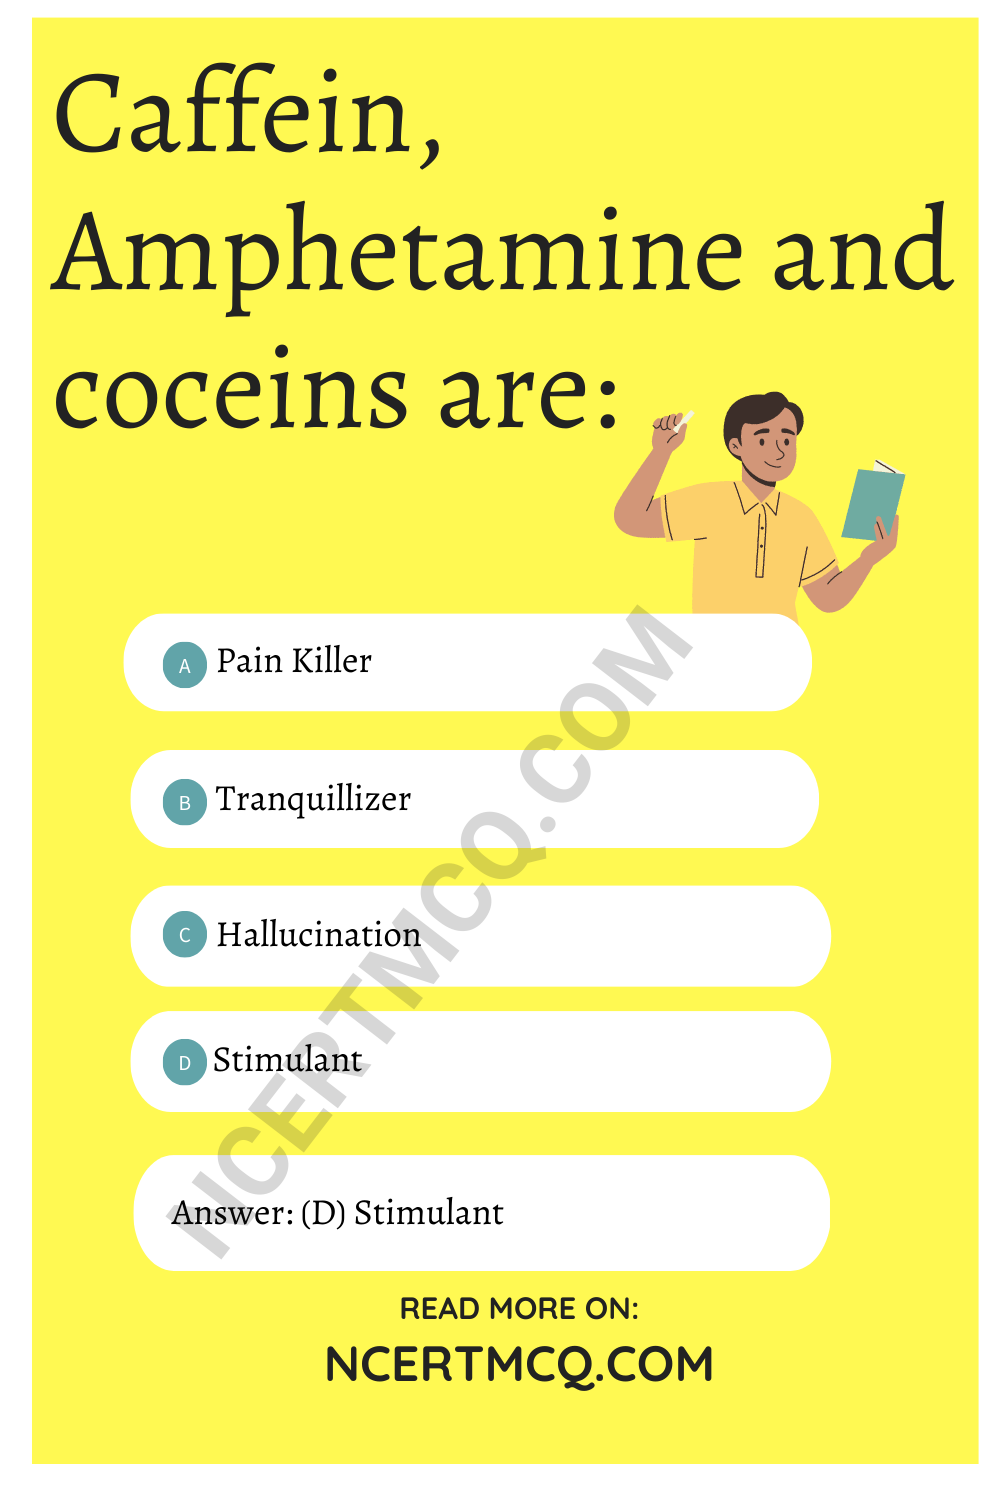 Caffein, Amphetamine and coceins are: